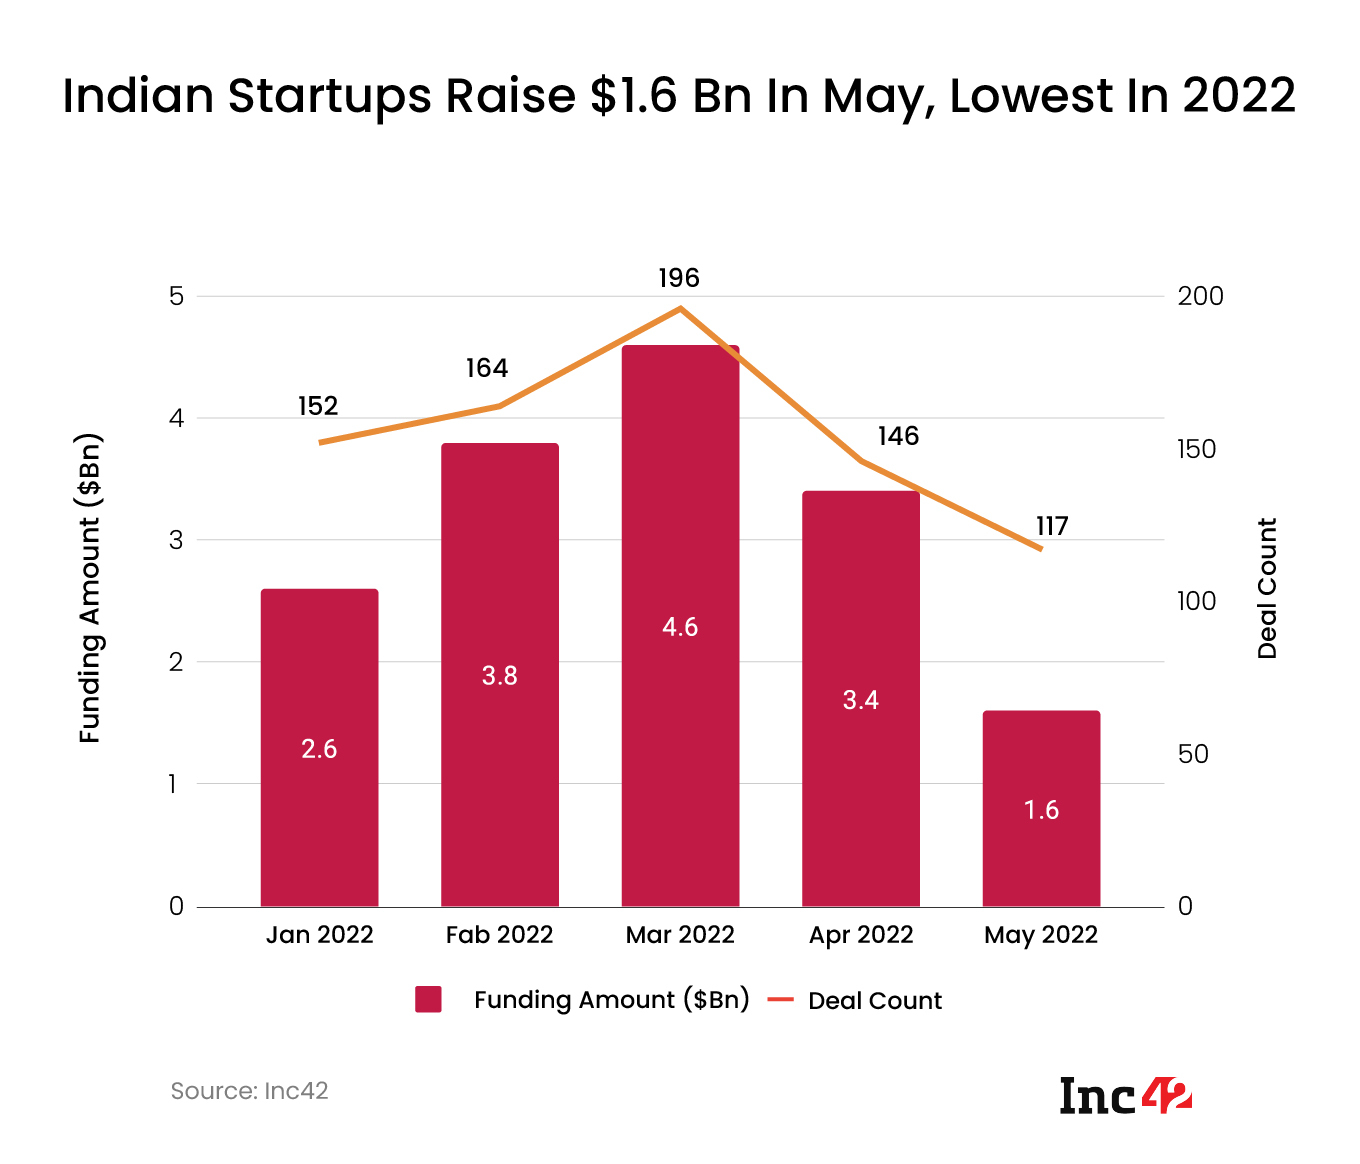 Indian Startups Raise $1.6 Bn in May, Lowest in 2022